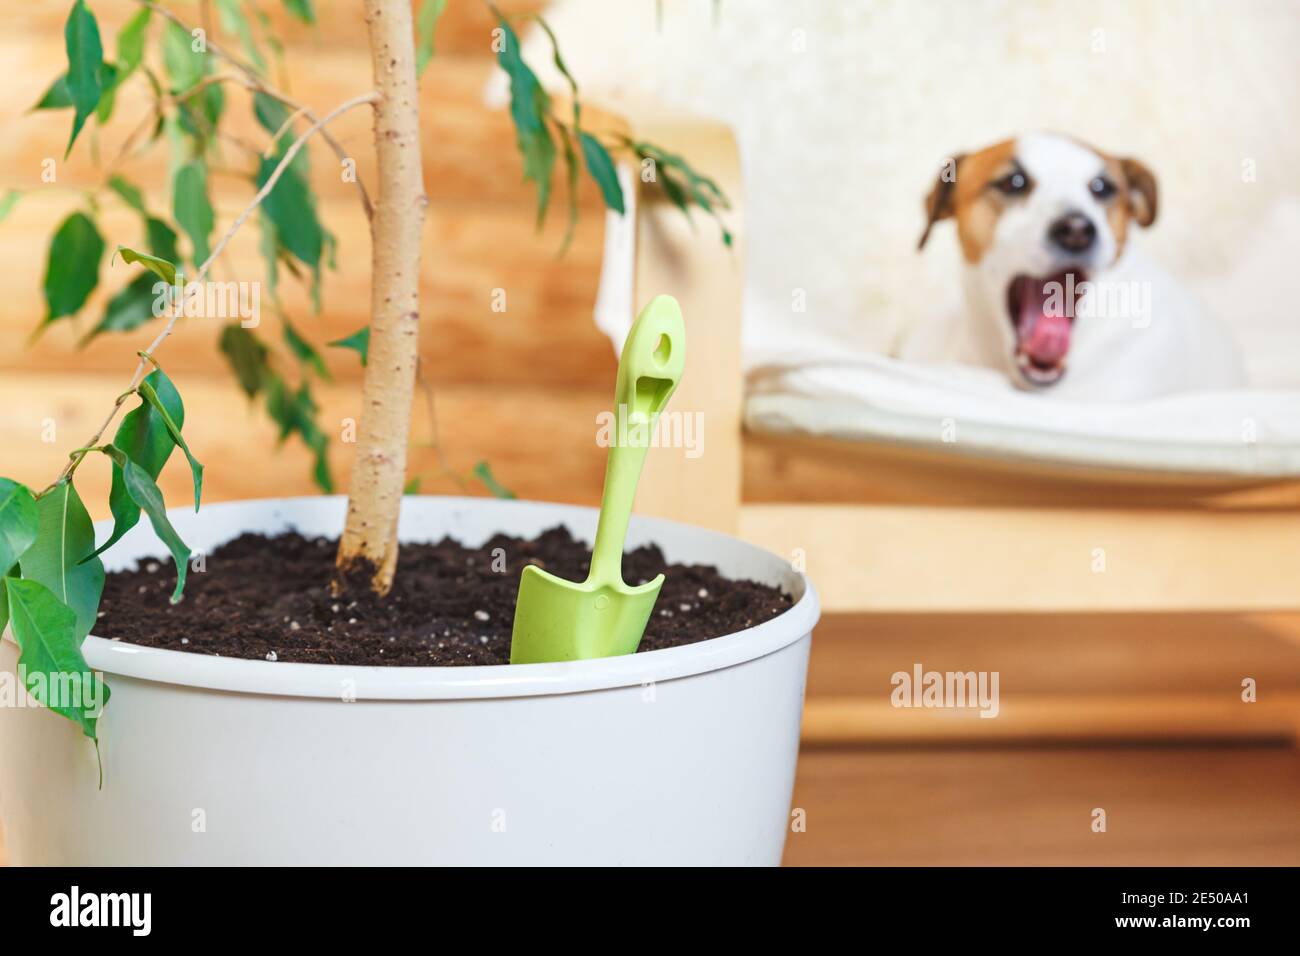 Houseplant care concept. Cozy eco-friendly wooden house with a garden and pets. Stock Photo